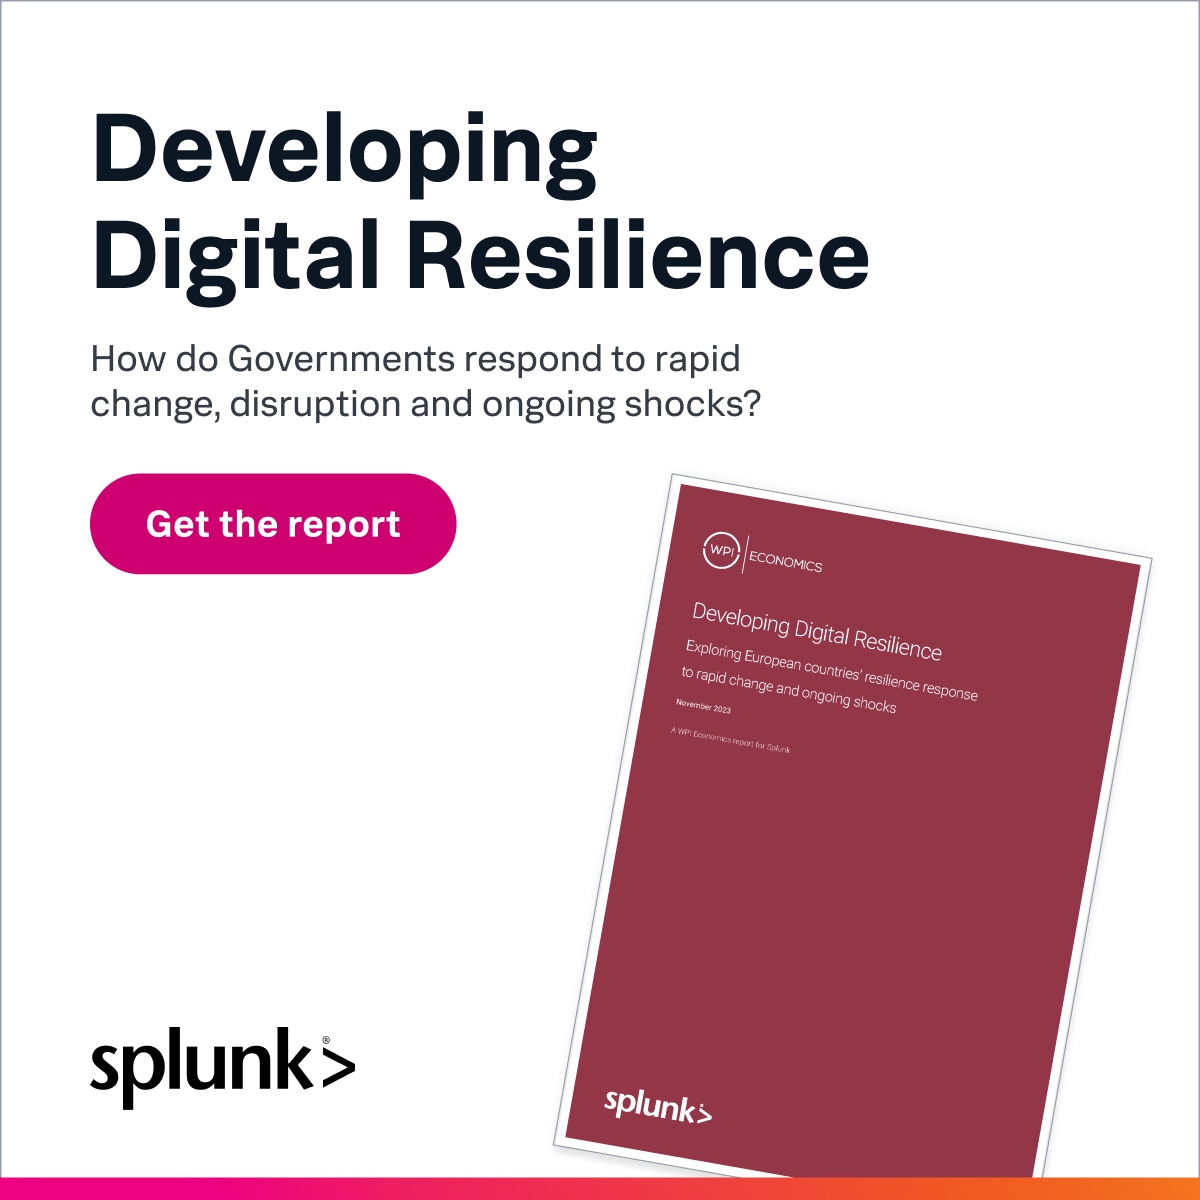 Developing Digital Resilience